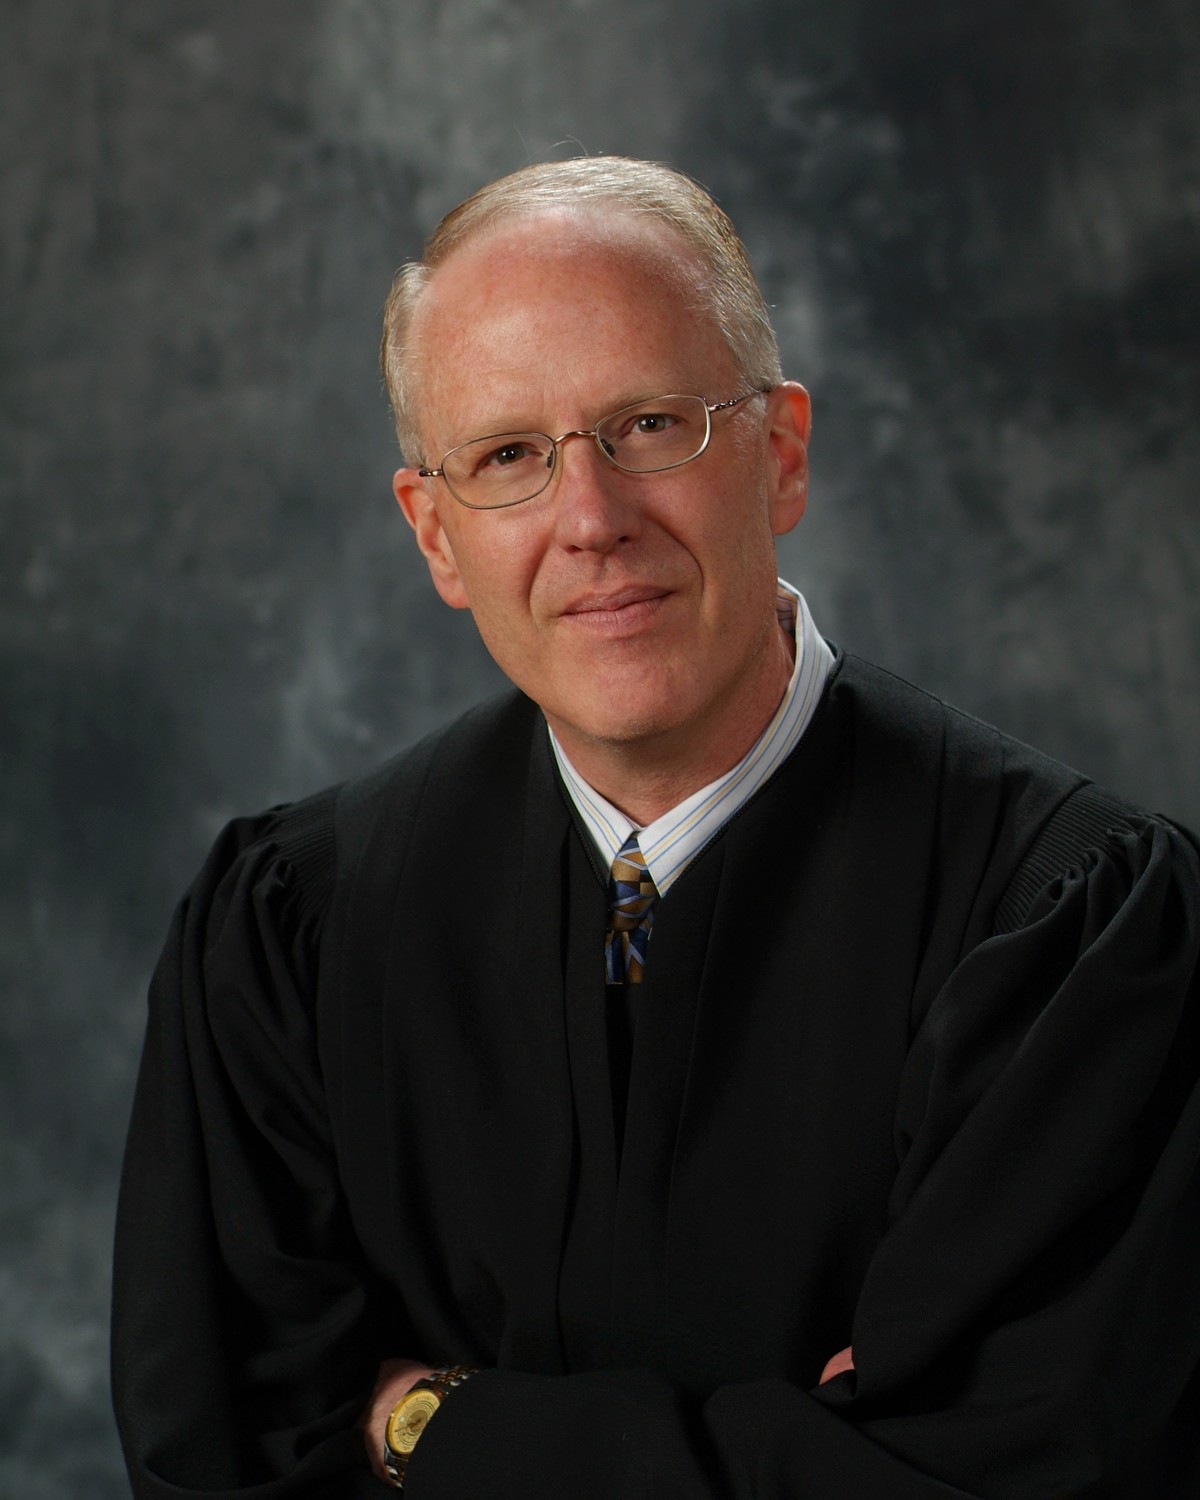 JUDGE WALLACE A. LEE